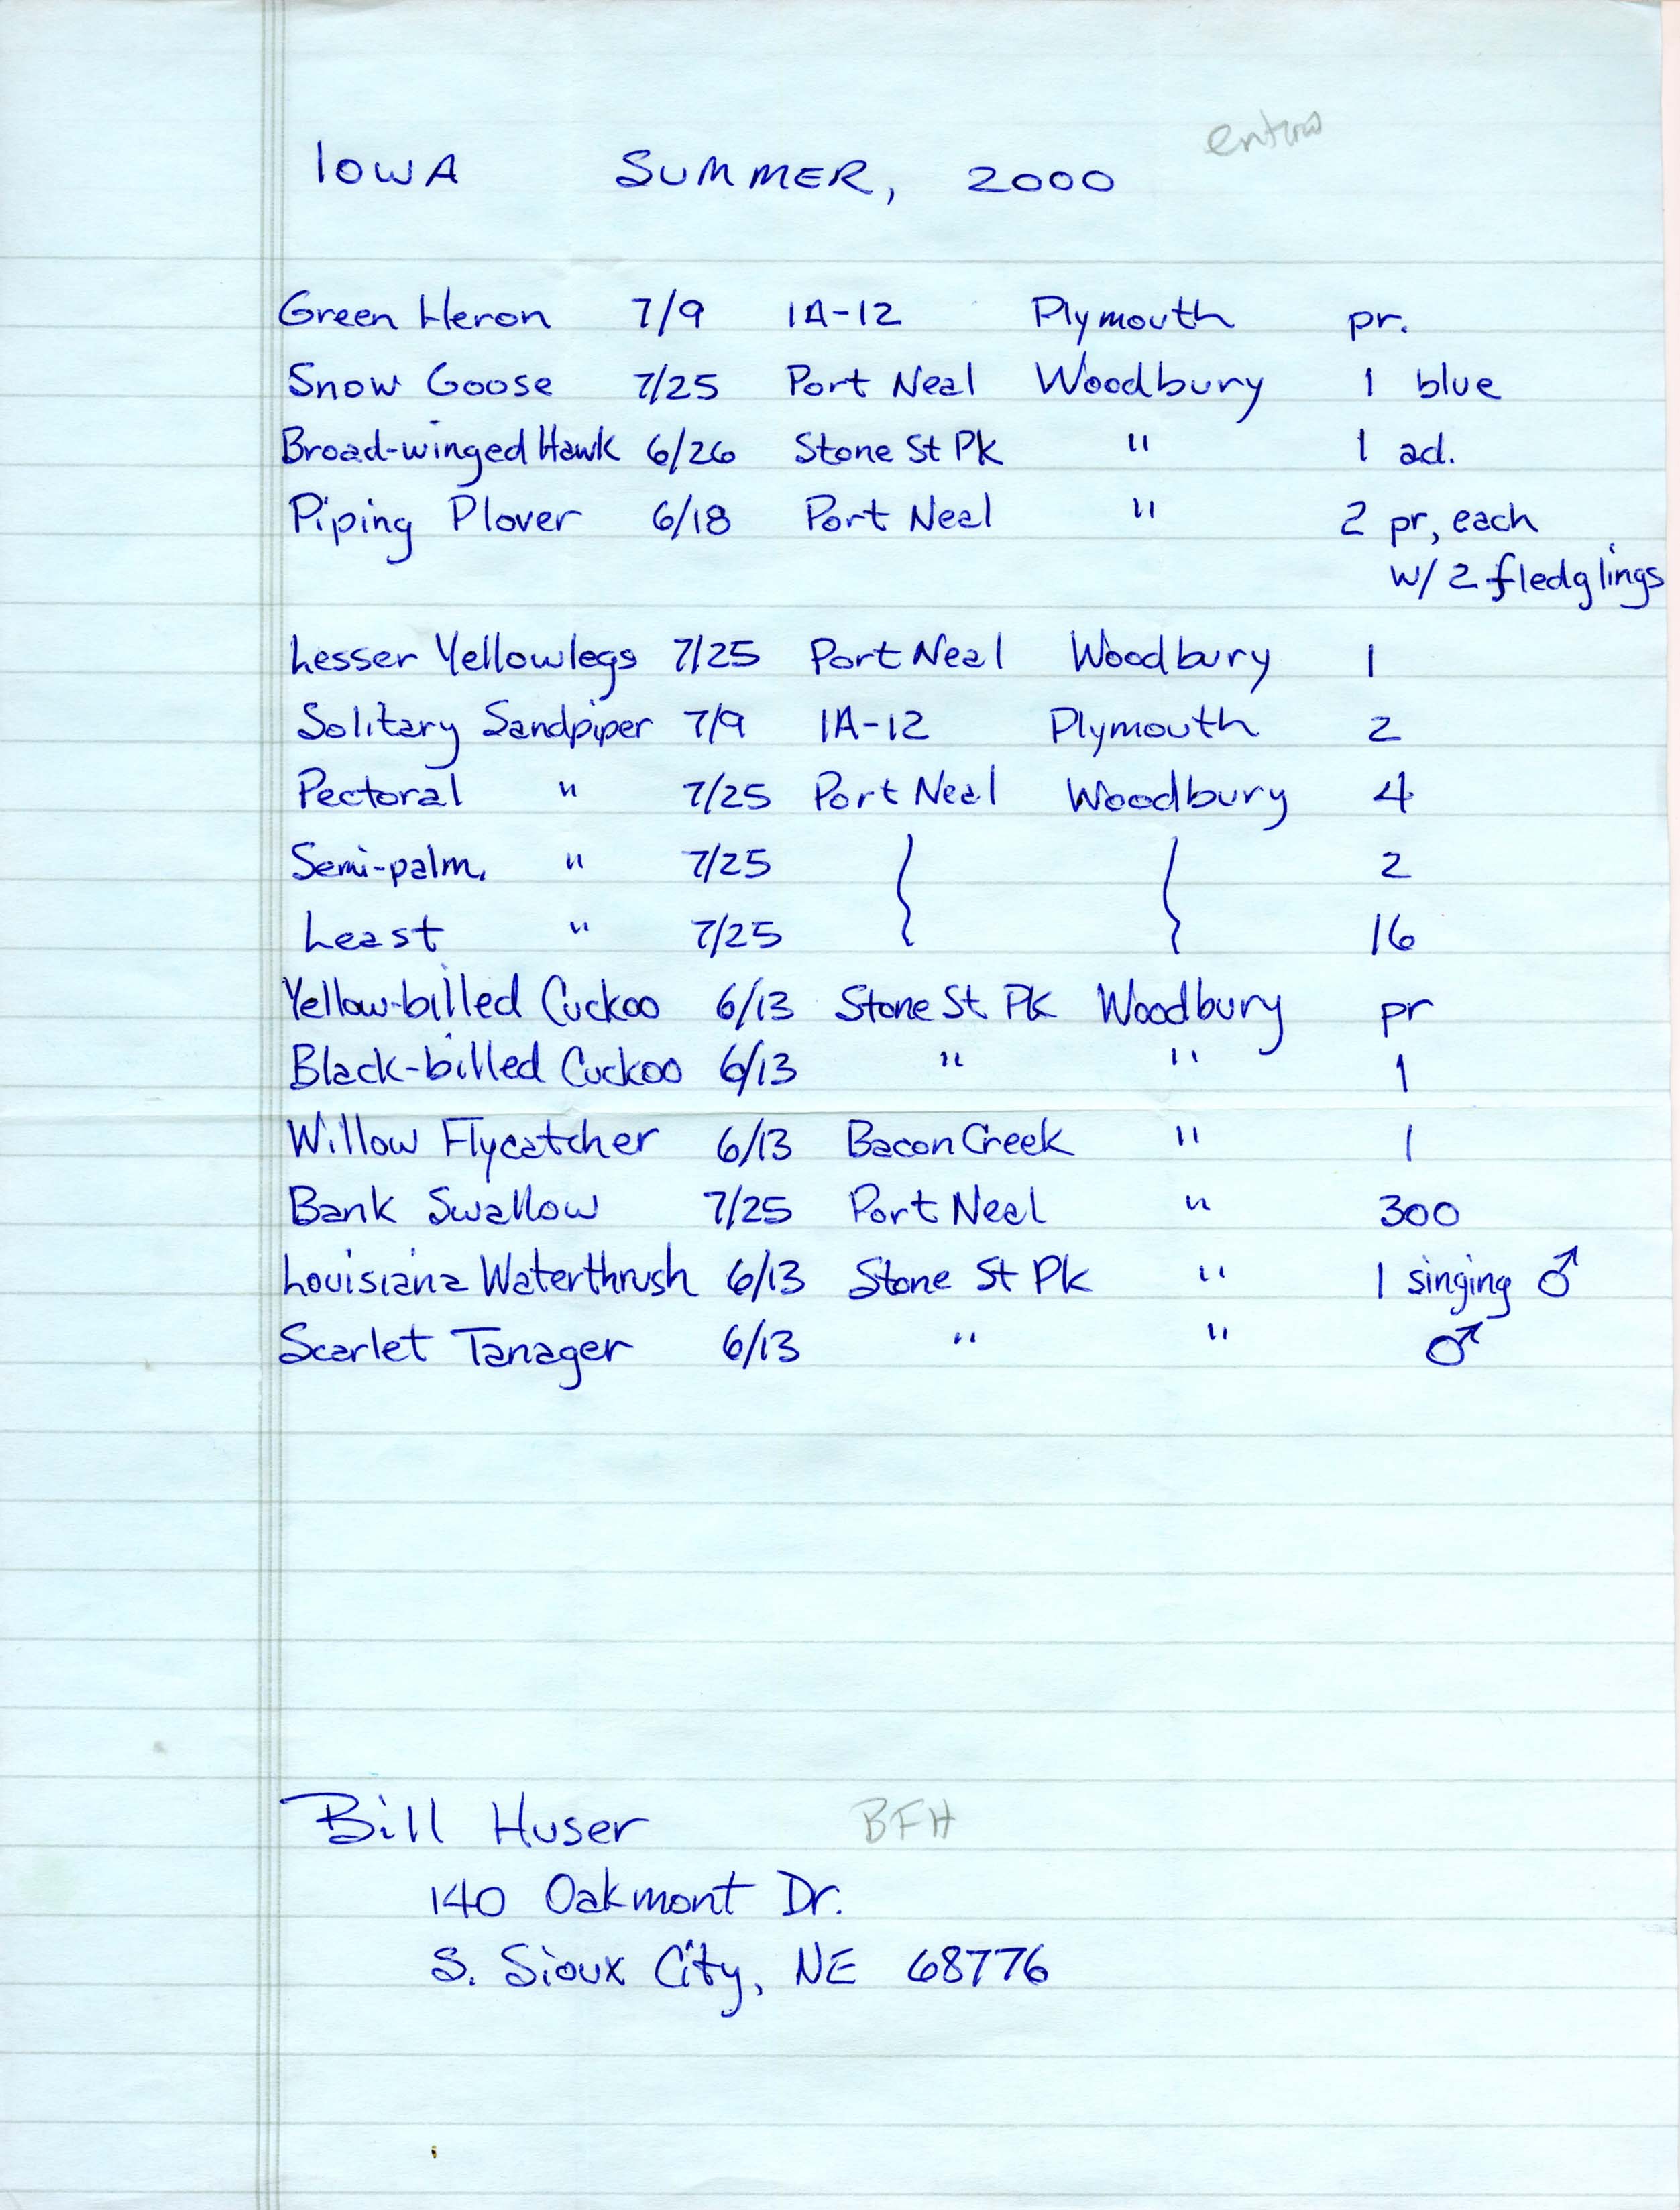 Field notes contributed by Bill F. Huser, summer 2000